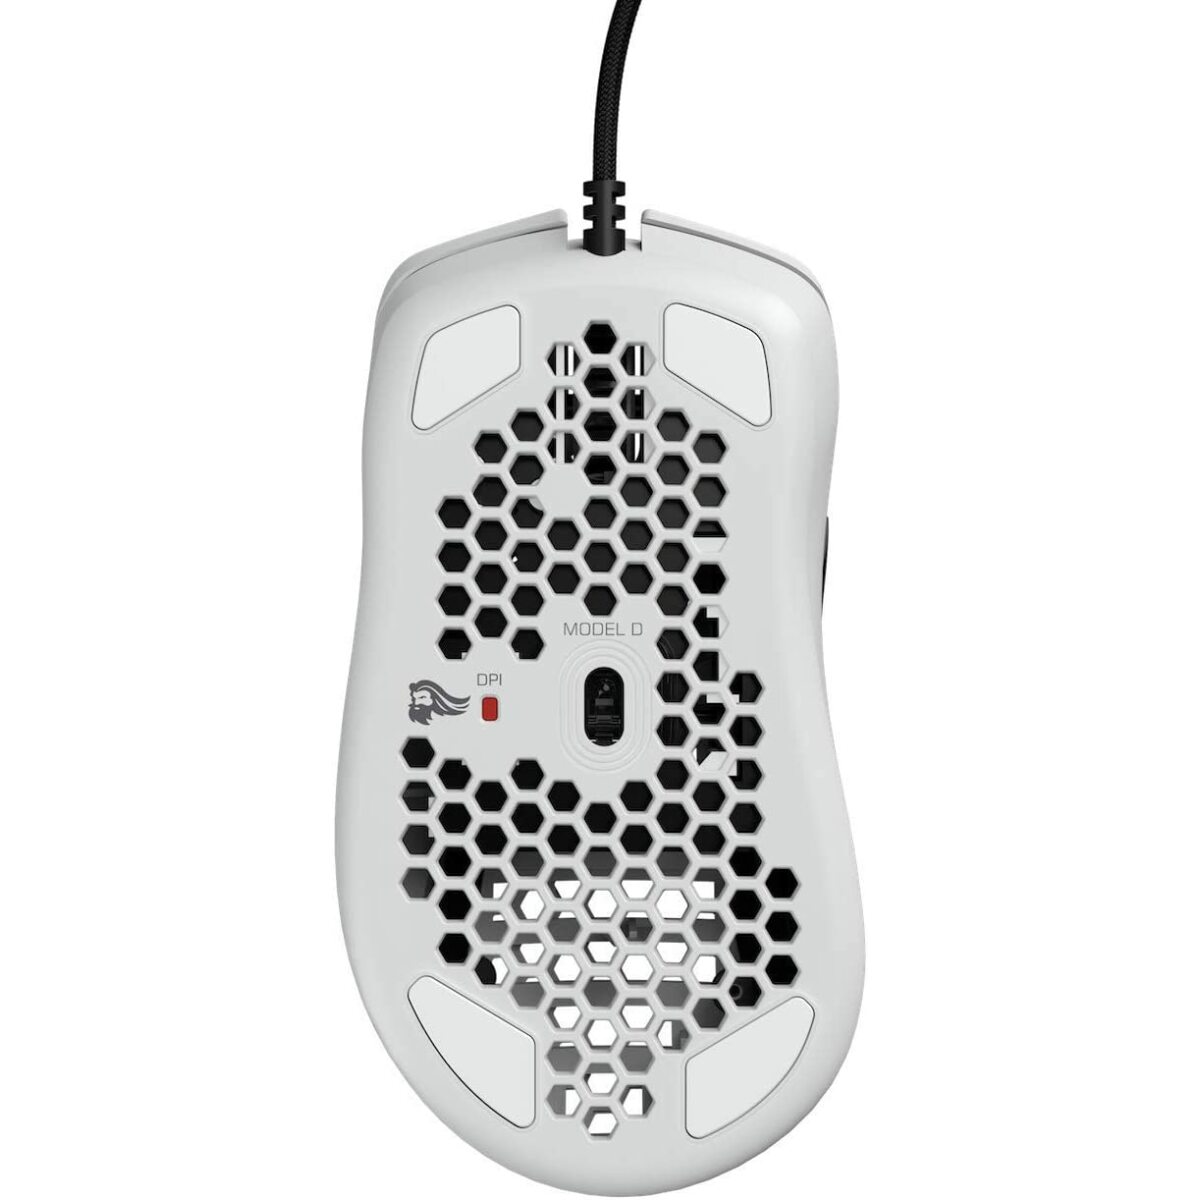 Model D Souris Gaming - Blanche Glorious Pc Gaming Race